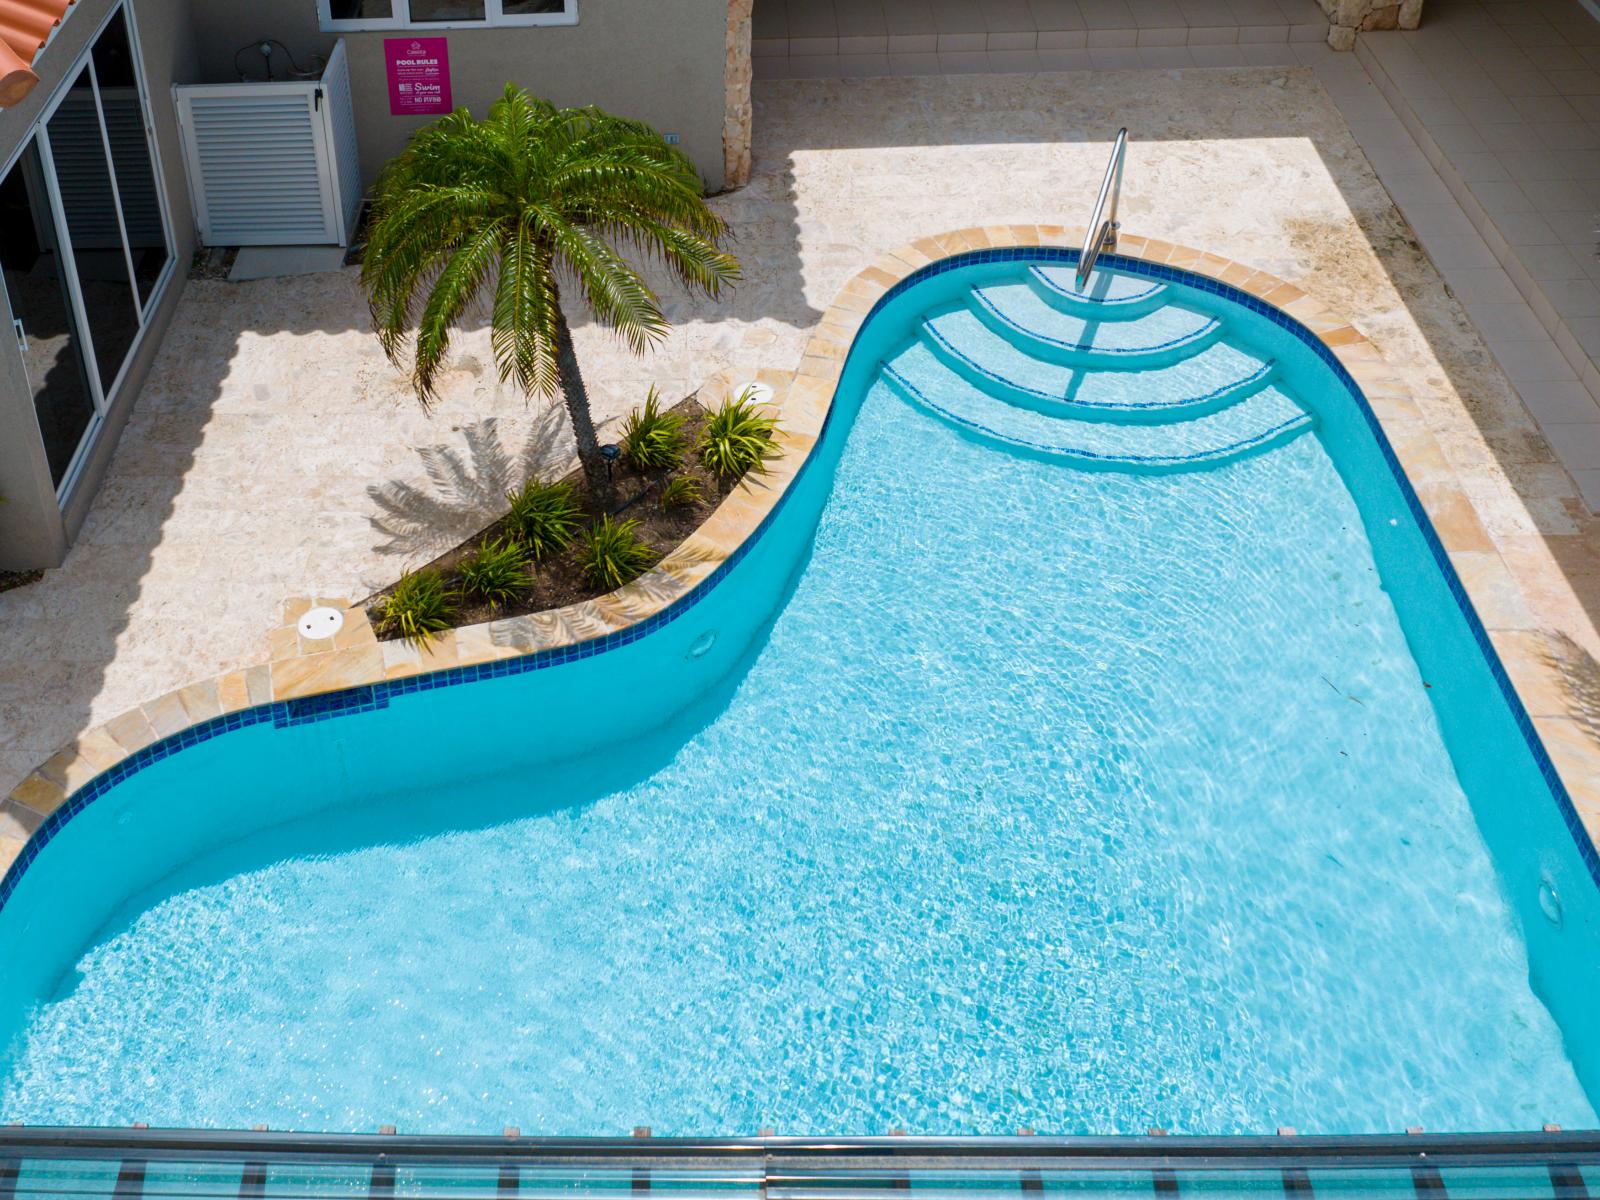 Lavish Pool Area of the Apartment Noord Aruba - Provides a relaxed atmosphere for unwinding - Designed with visual charm through landscaping - Arial View of Pool